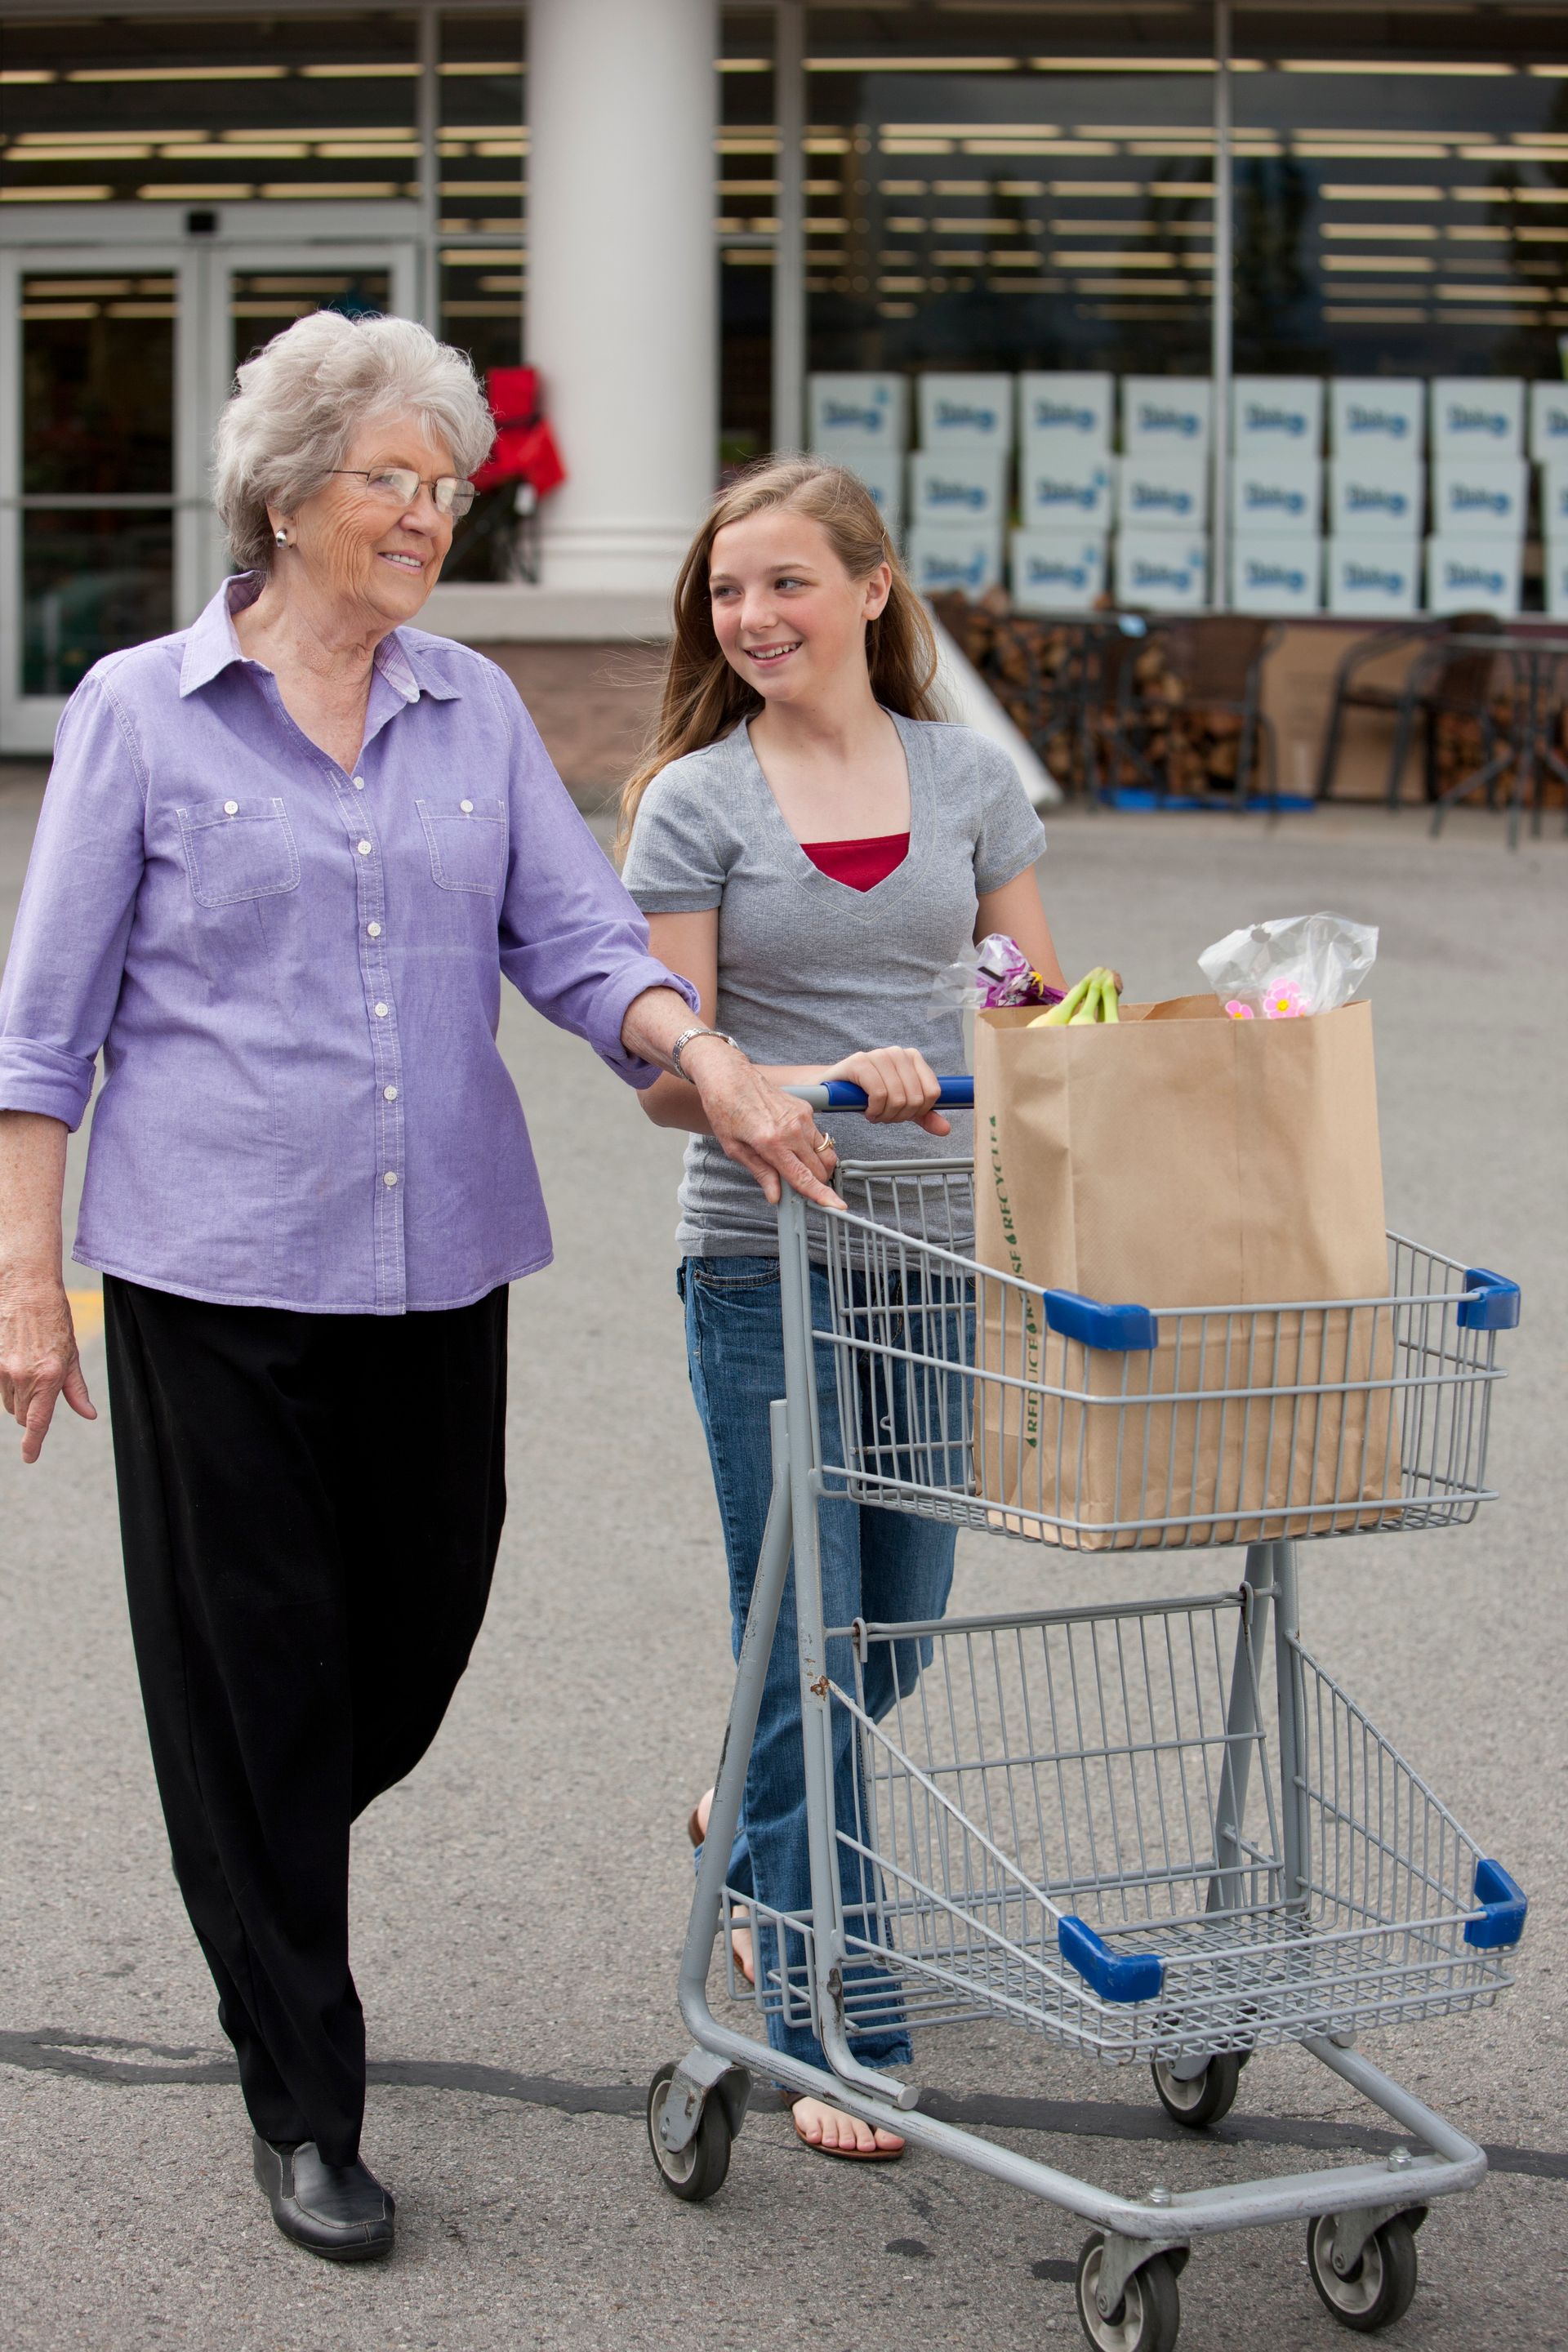 A young woman helps push a cart for an elderly woman with her groceries.  